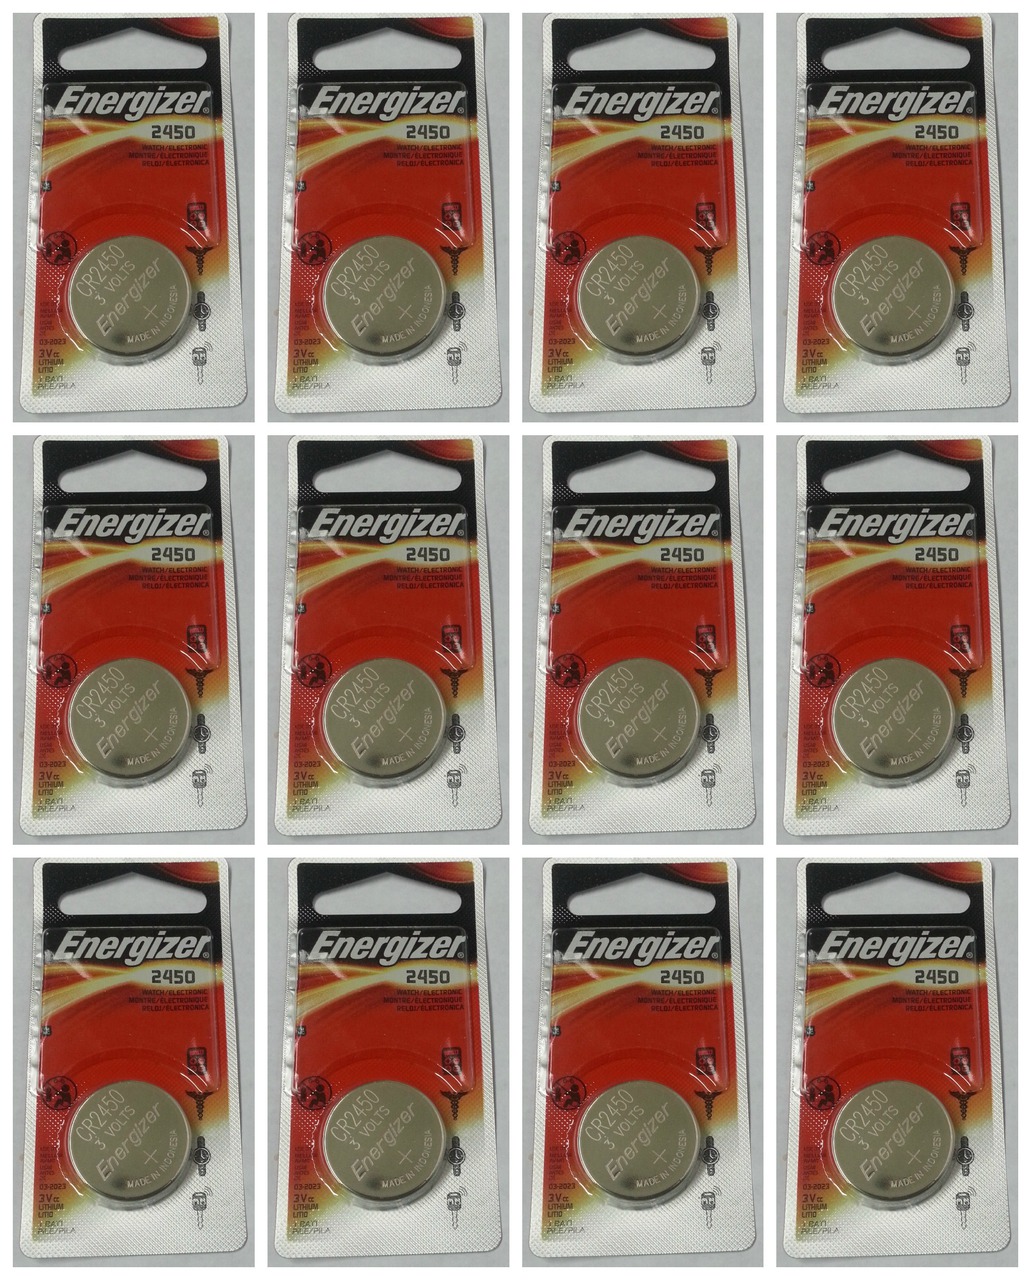 Energizer CR2450 3V Lithium Coin Battery 12 Pack + FREE SHIPPING